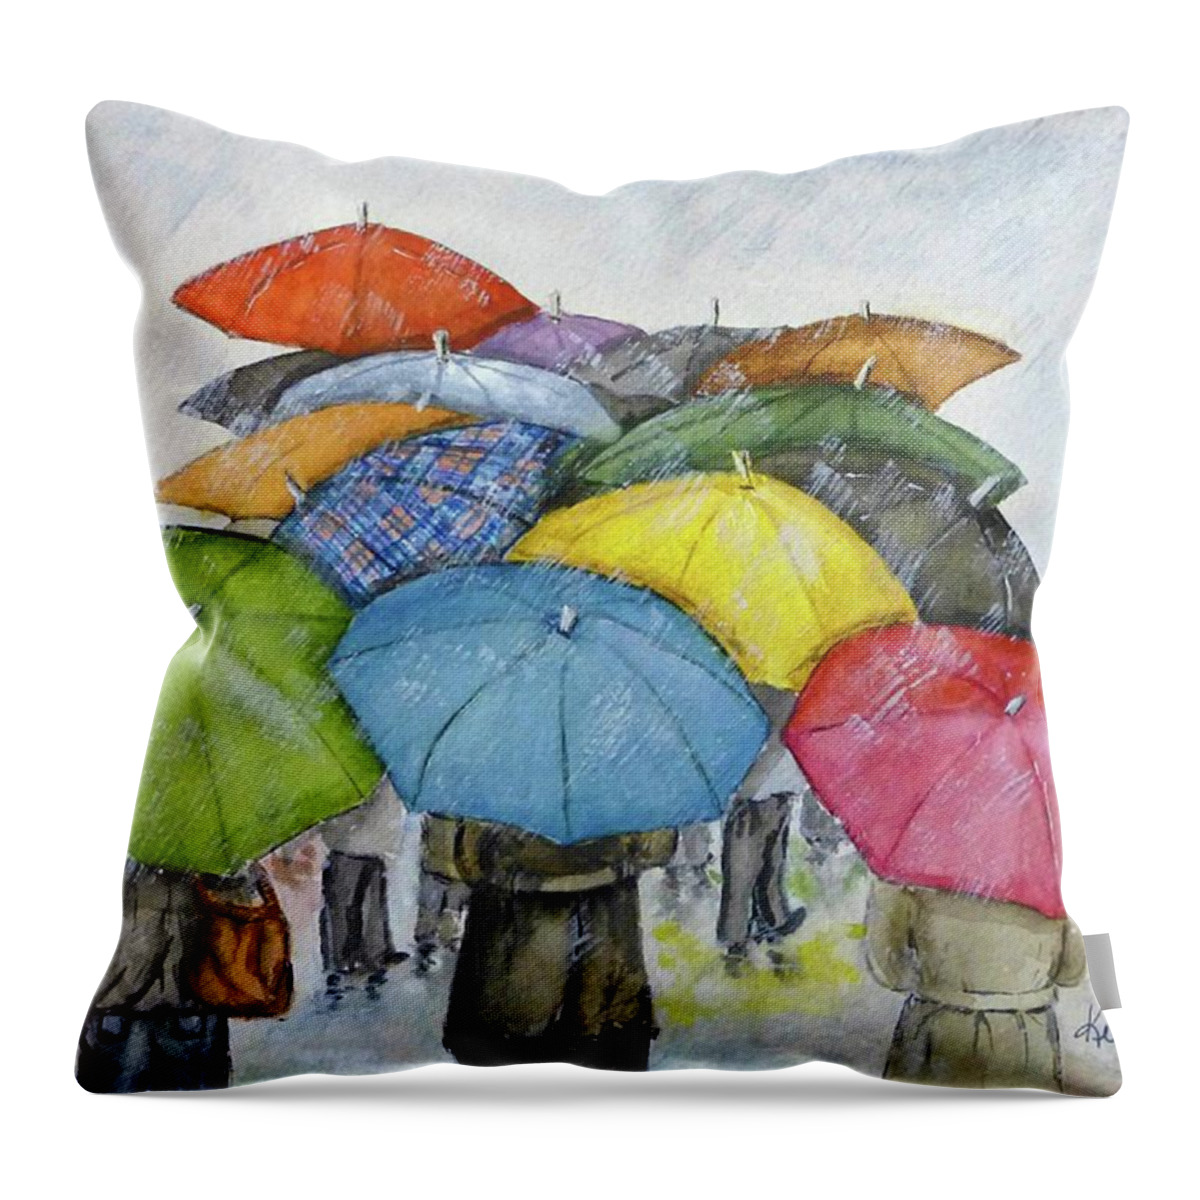 Umbrella Throw Pillow featuring the painting Umbrella Huddle Walk by Kelly Mills